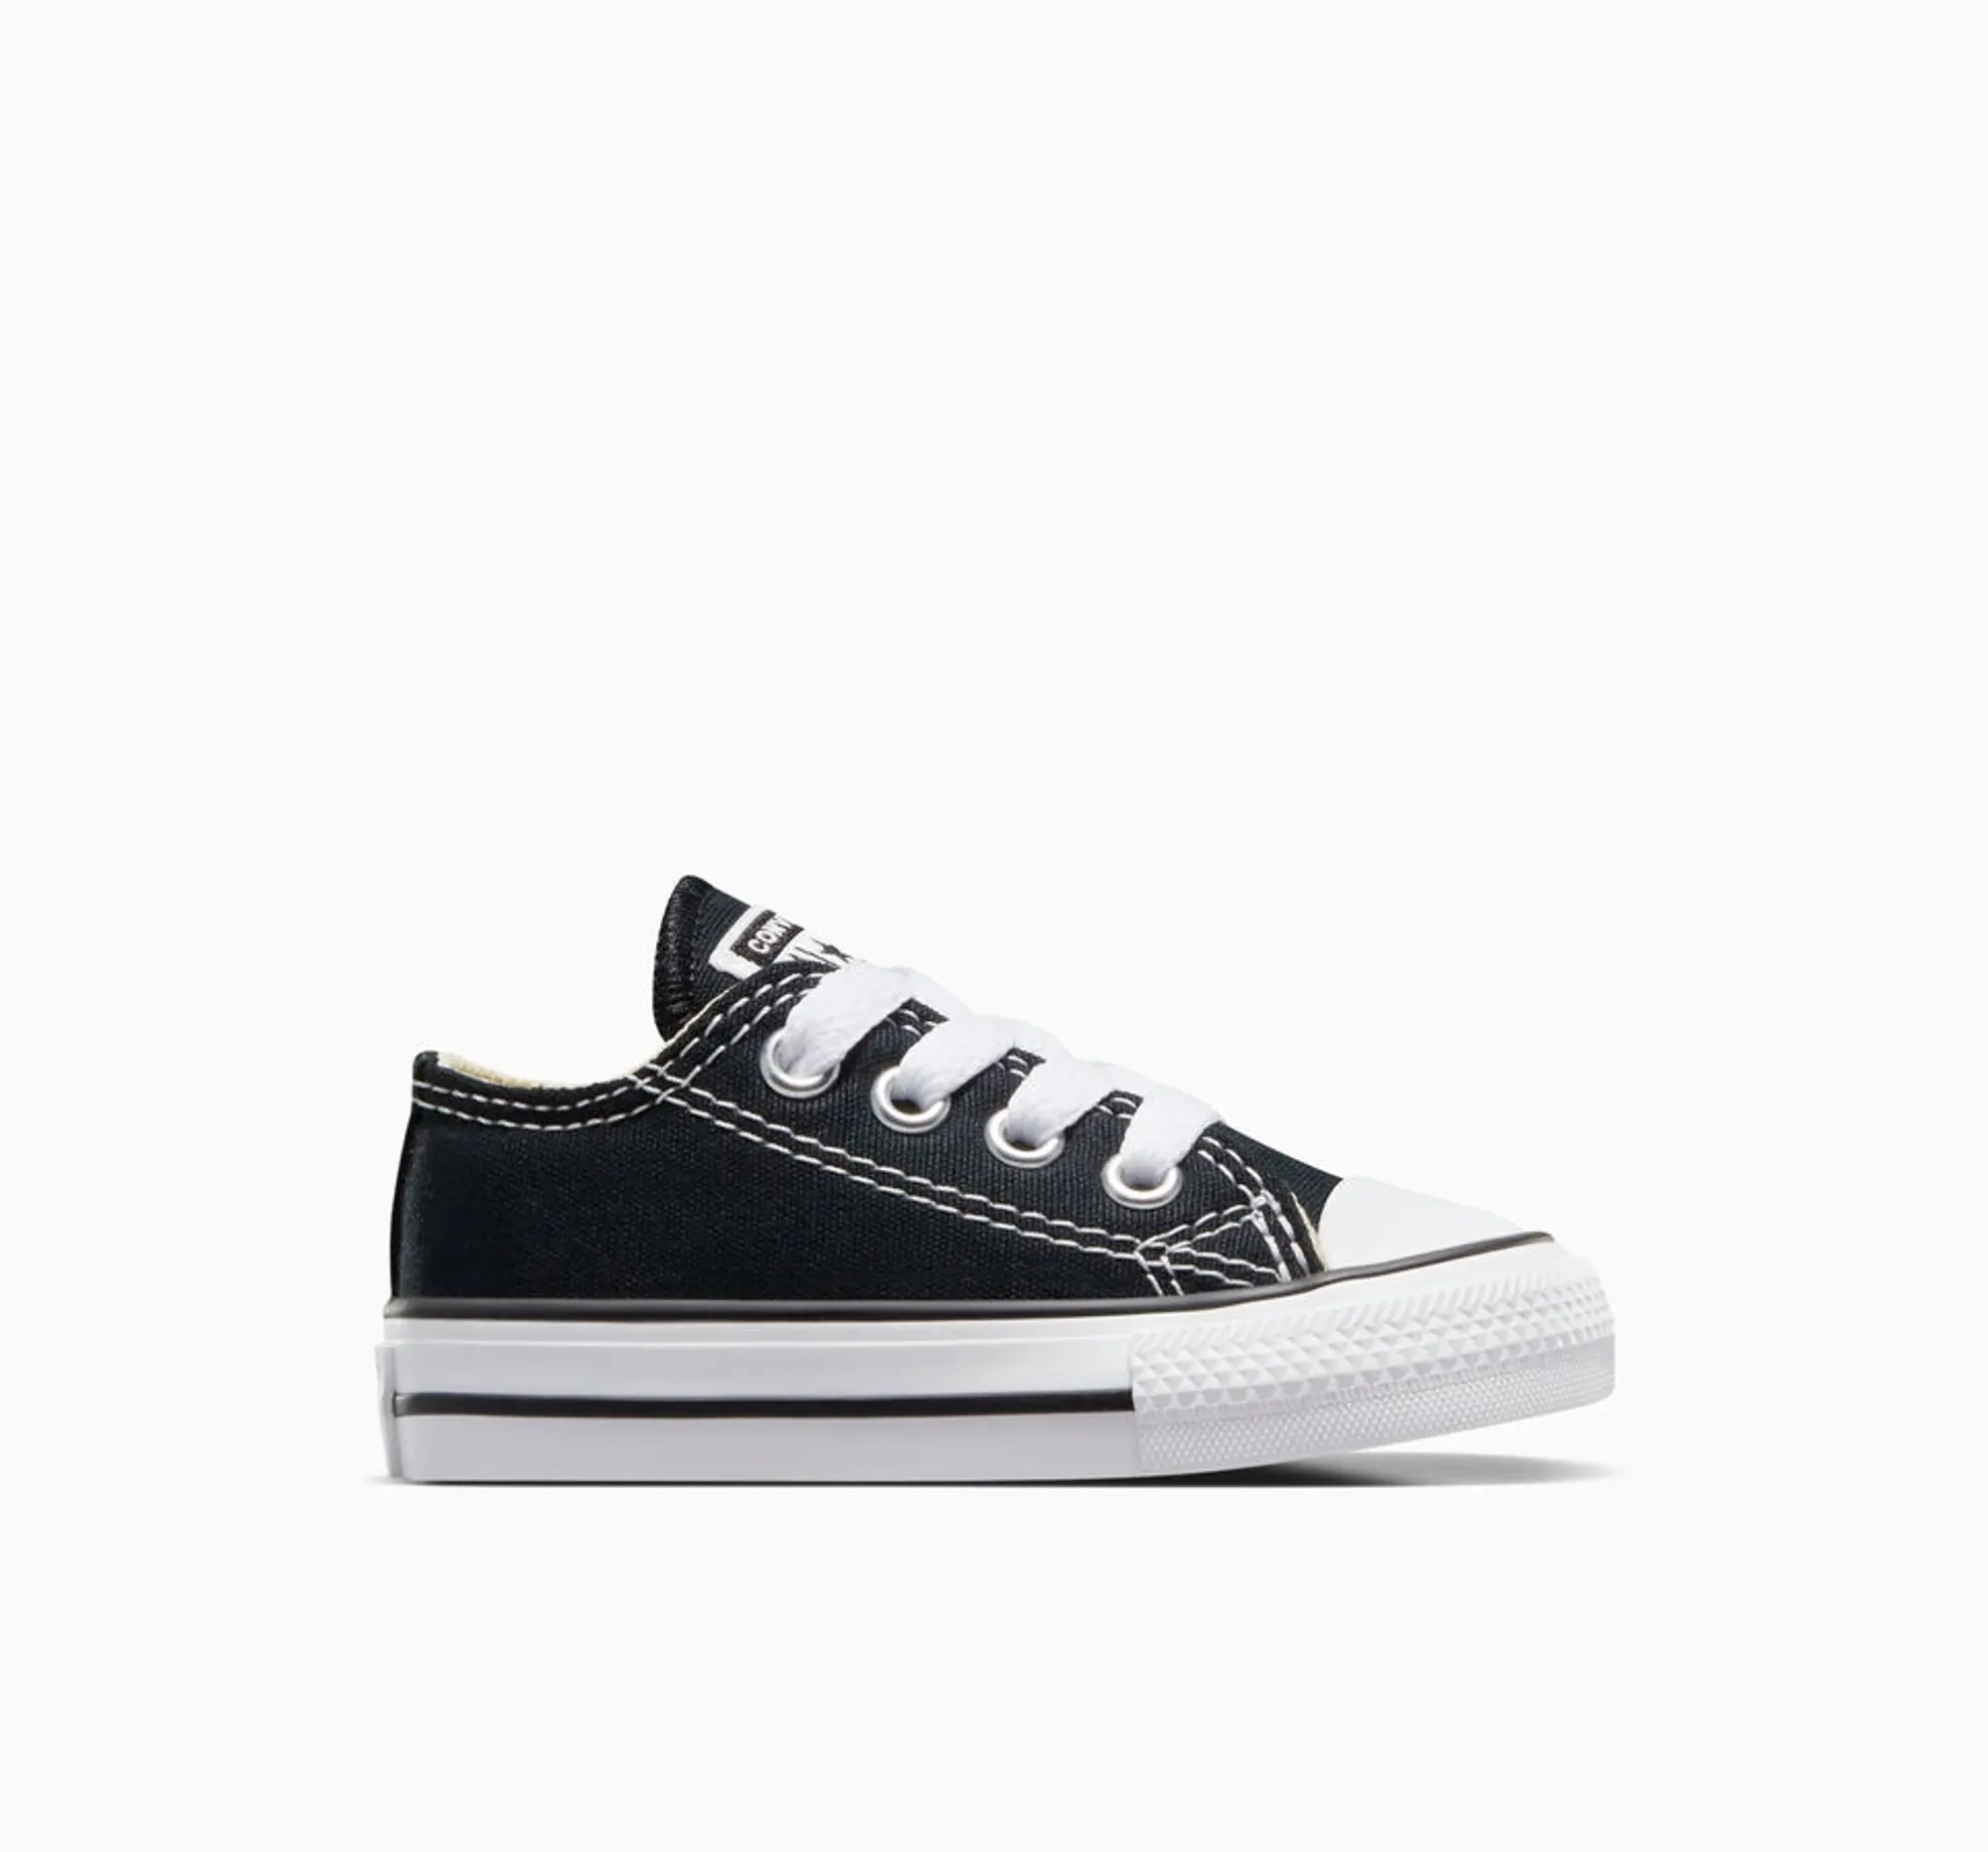 Converse Chuck Taylor All Star Ox Infant Unisex Trainers -Black, Black